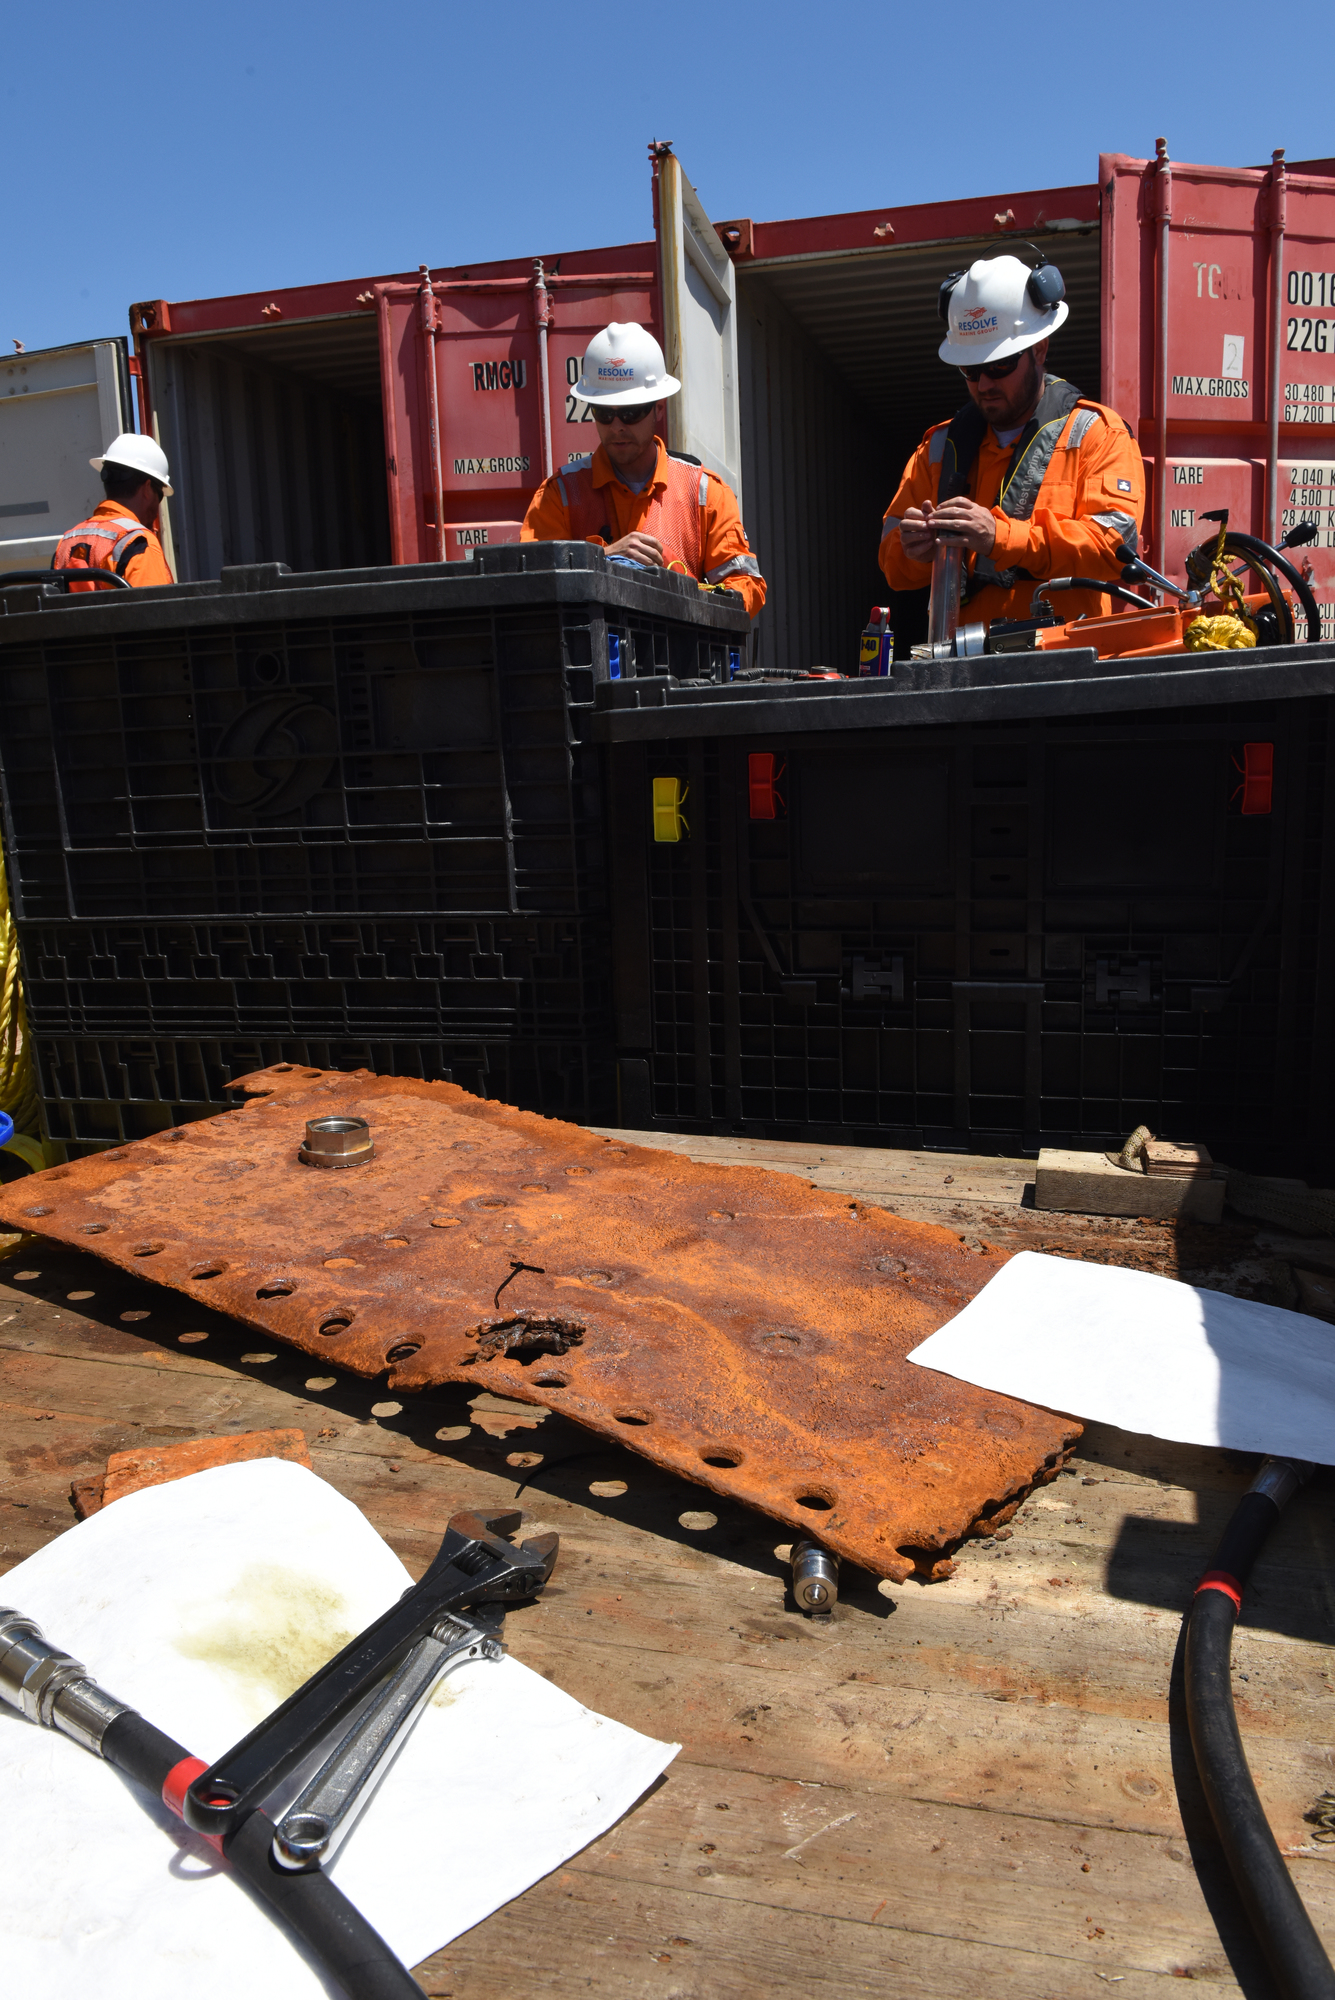 ATLANTIC OCEAN – A piece of the tanker Coimbra salvaged from 180 feet of water, rests on the deck of the Shelia Bordelon while two crew members label oil samples for testing, May 16, 2019. The U.S. Coast Guard has contracted Resolve Marine Group to conduct a full assessment of oil remaining on the Coimbra wreck, located approximately 30 miles southeast of Shinnecock, N.Y. If substantial oil still remains, and if feasible, the Coast Guard will work with Resolve Marine Group to remove oil from the wreck in order to reduce pollution risks to the environment. The Coimbra, a British-flagged supply ship, sunk off the coast of Long Island in January 1942 when a German U-boat torpedoed it. (U.S. Coast Guard photo by Chief Warrant Officer Allyson E.T. Conroy)